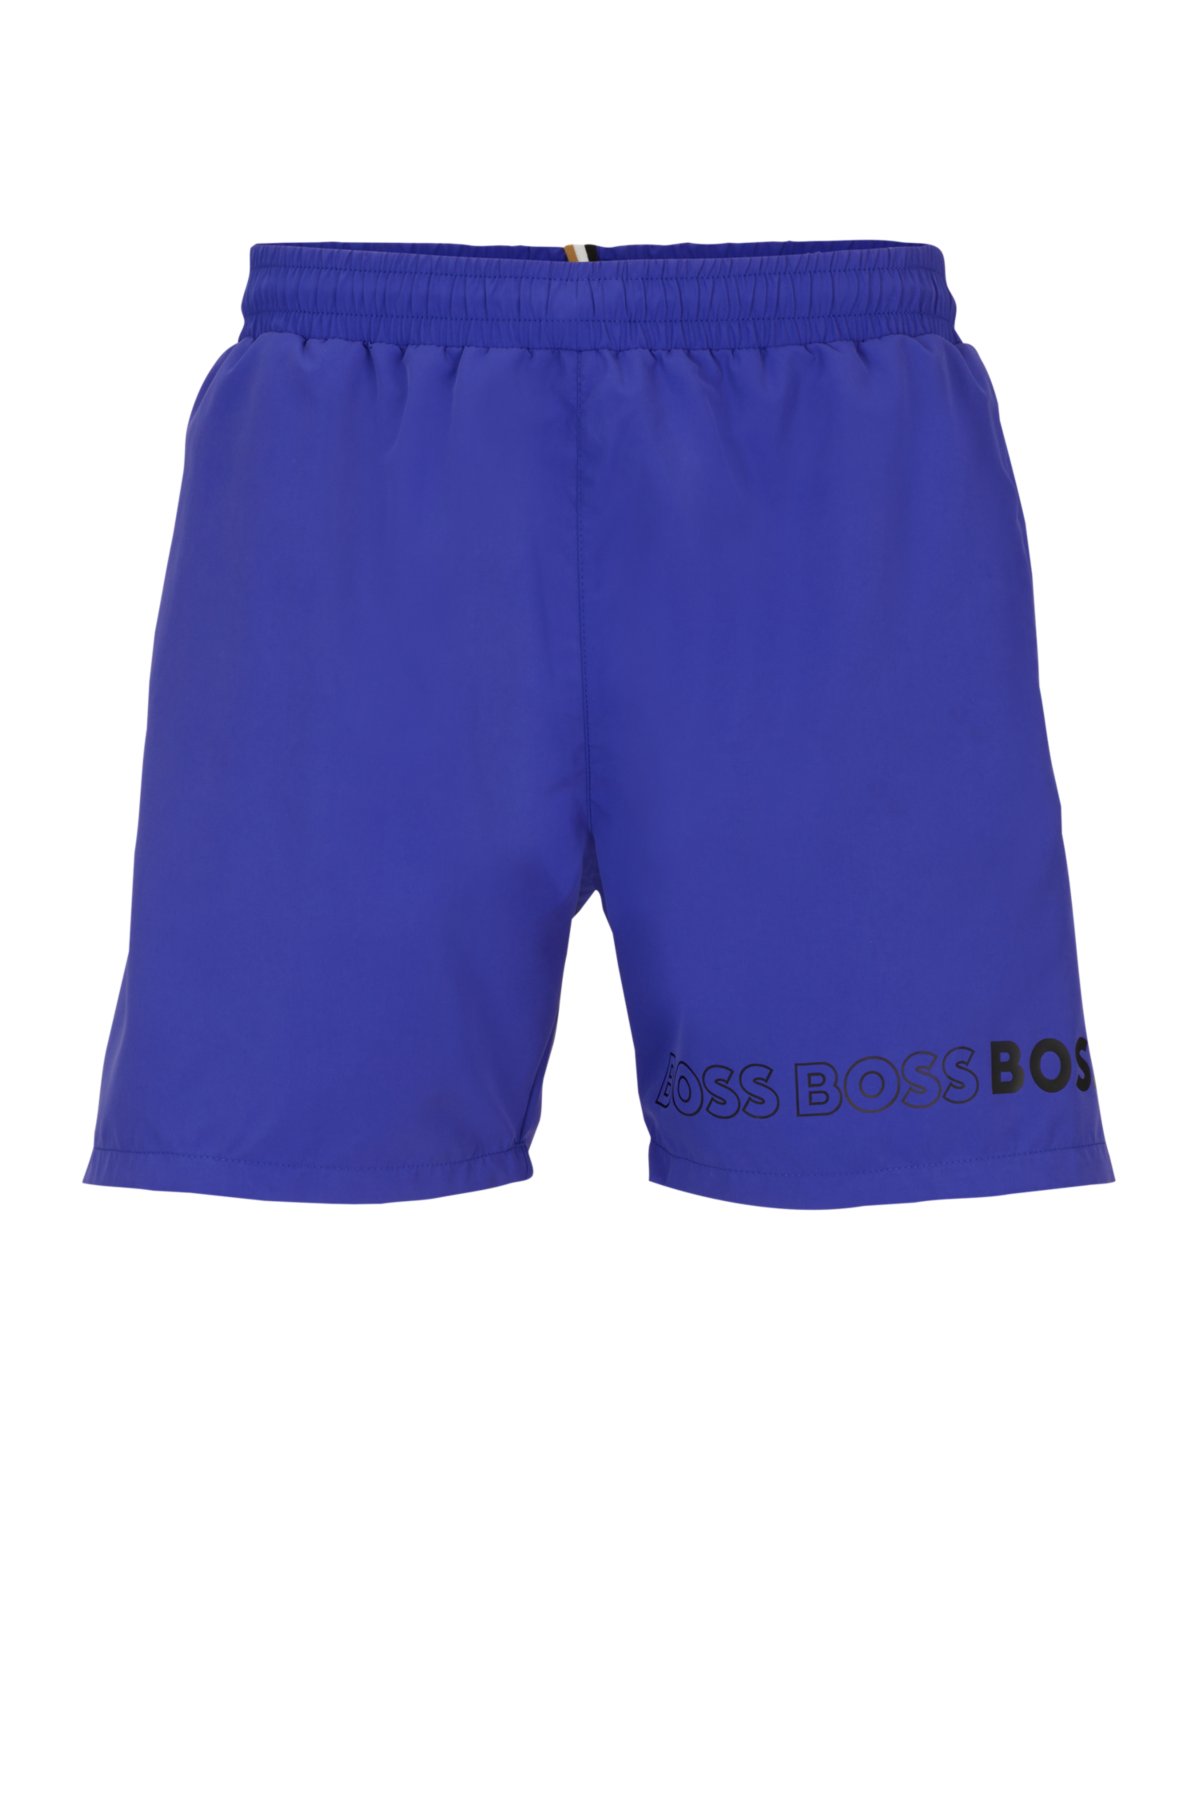 Swim shorts with repeat logos, Blue